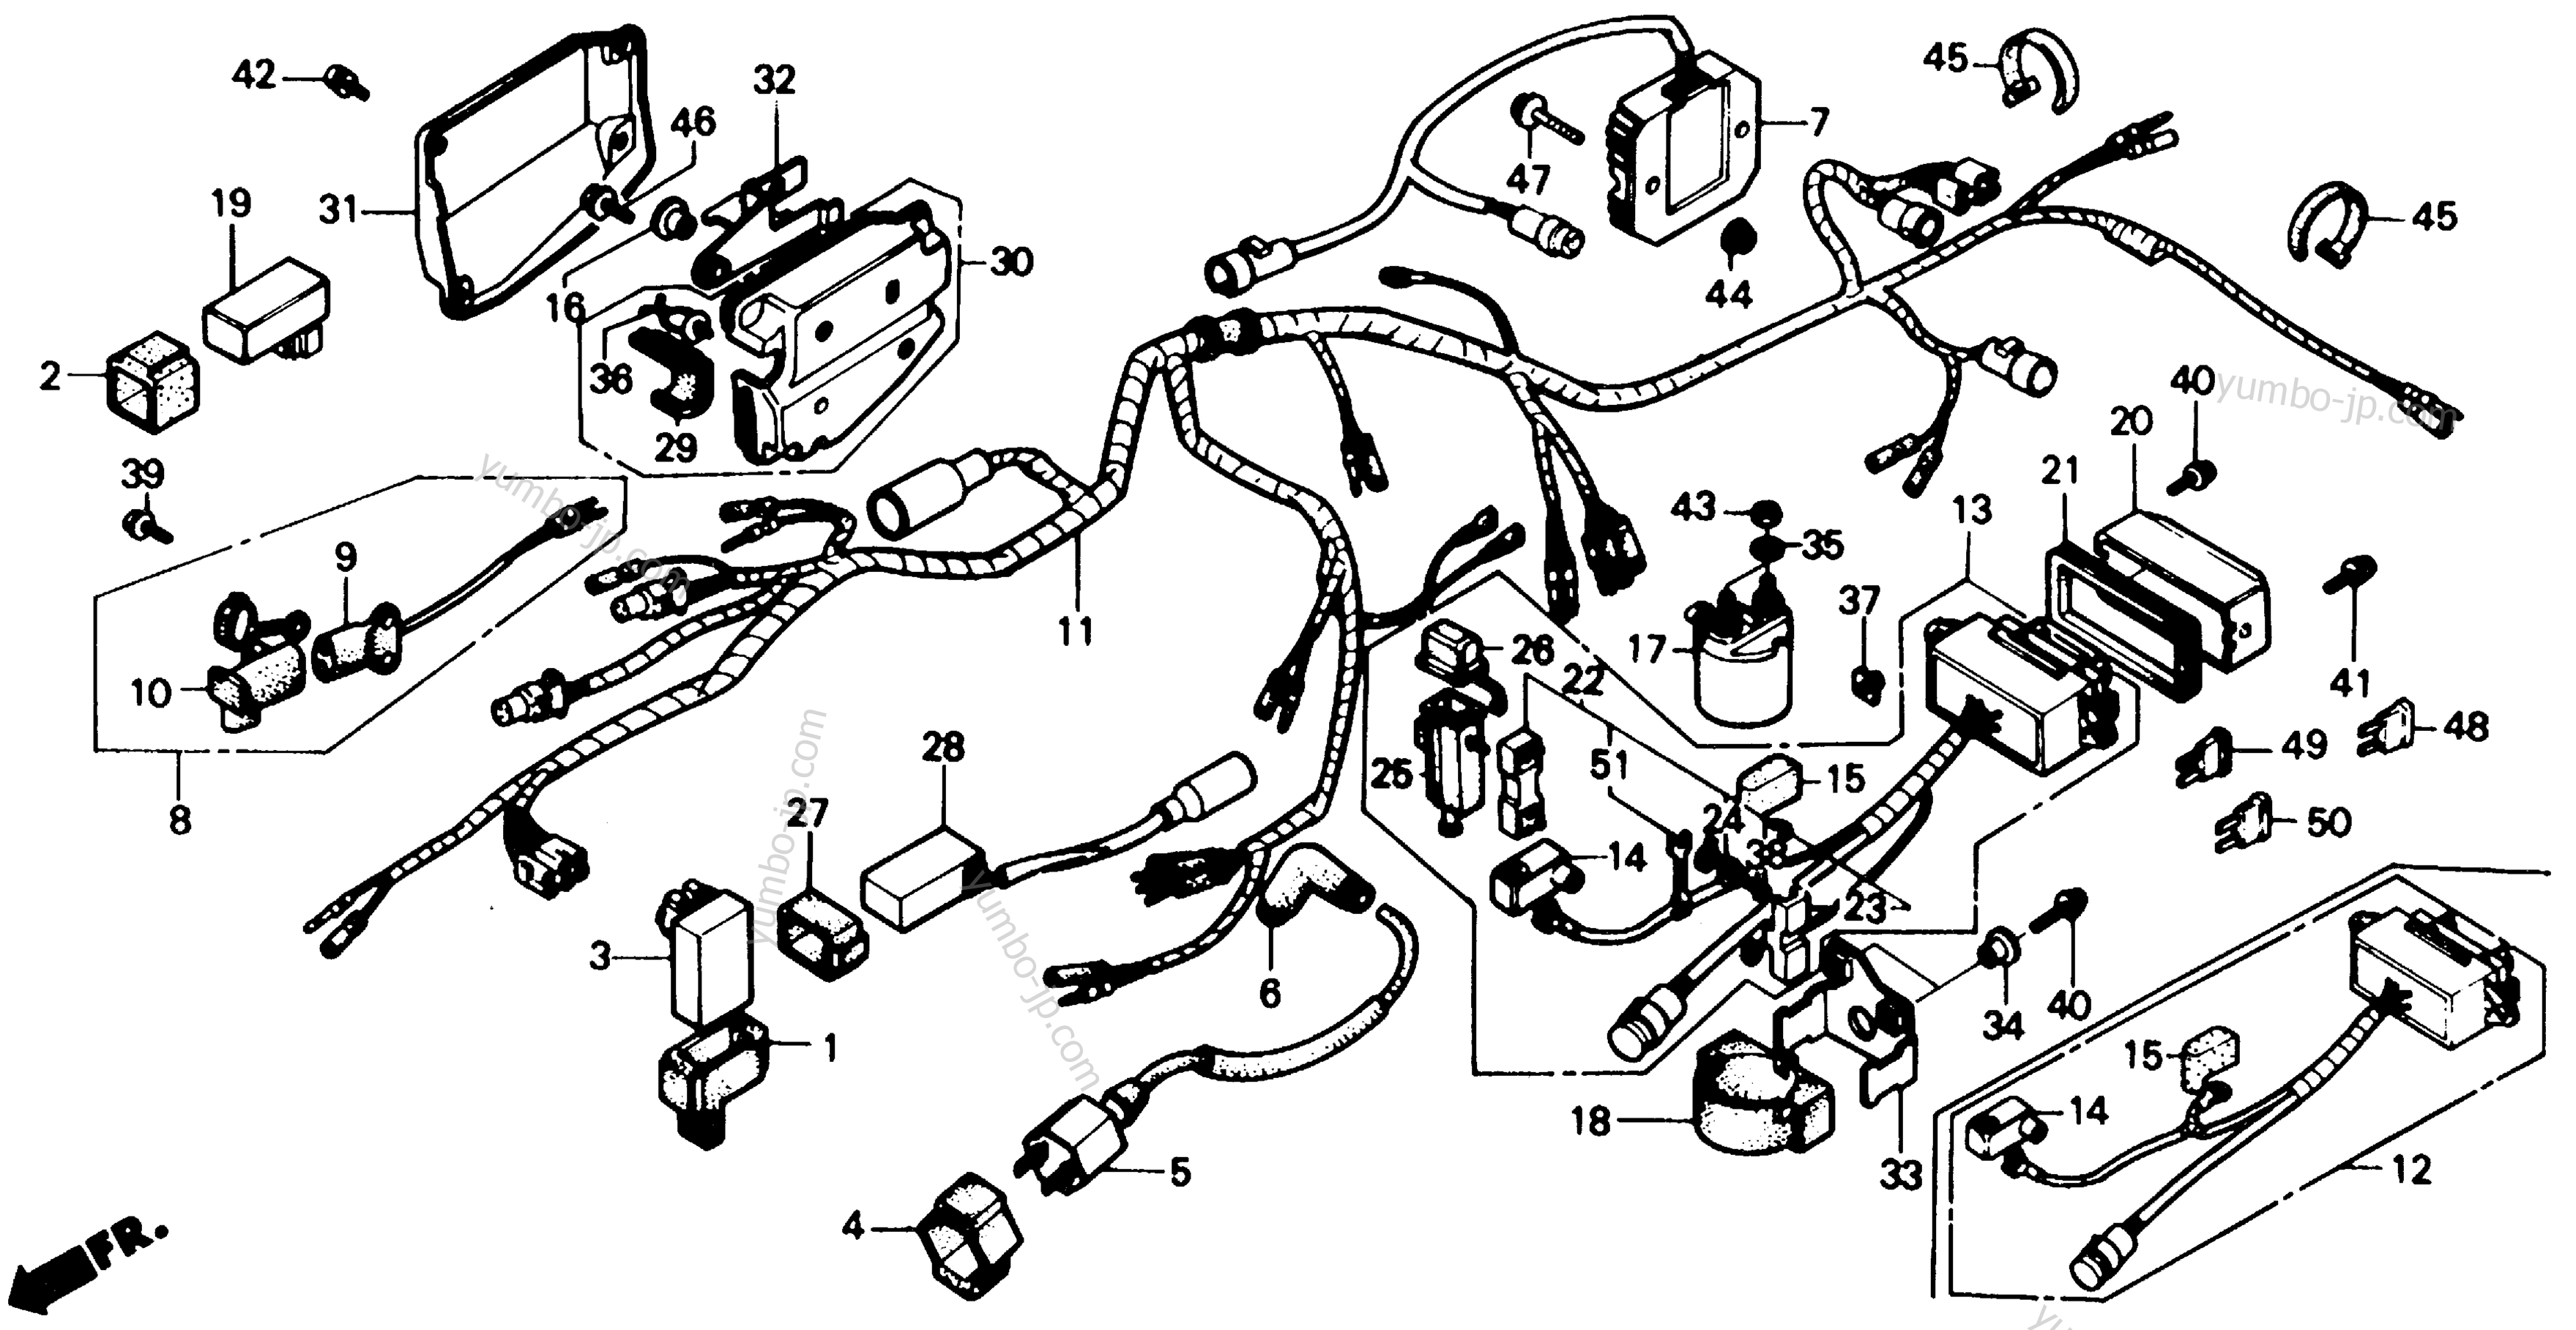 WIRE HARNESS for ATVs HONDA TRX350D A 1988 year